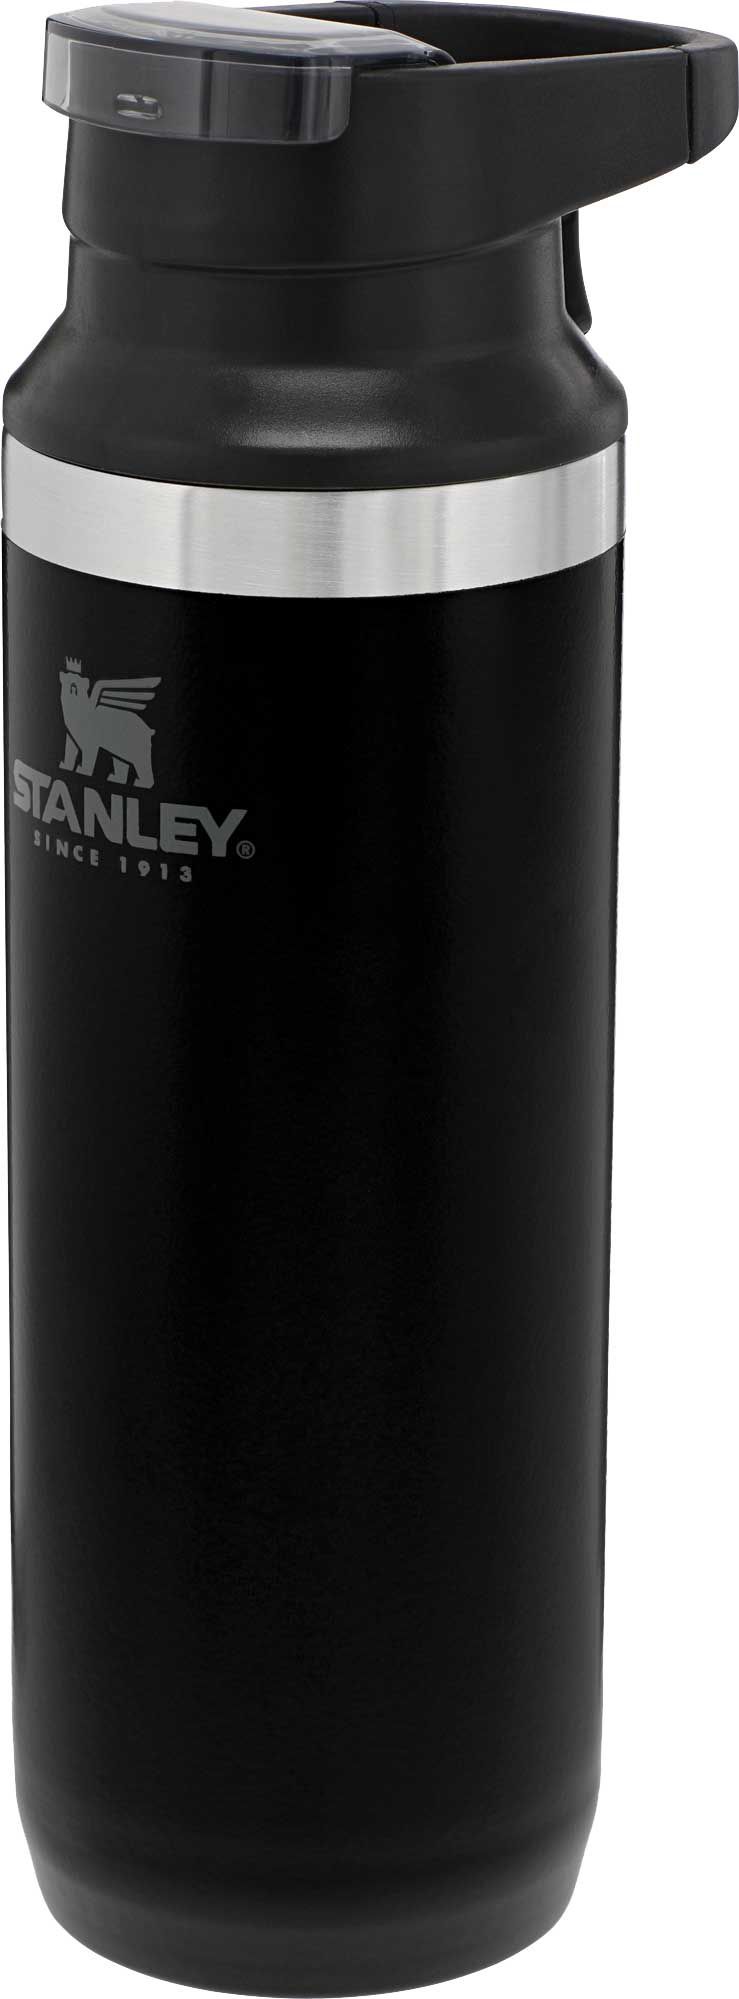 stanley coffee mug replacement lid